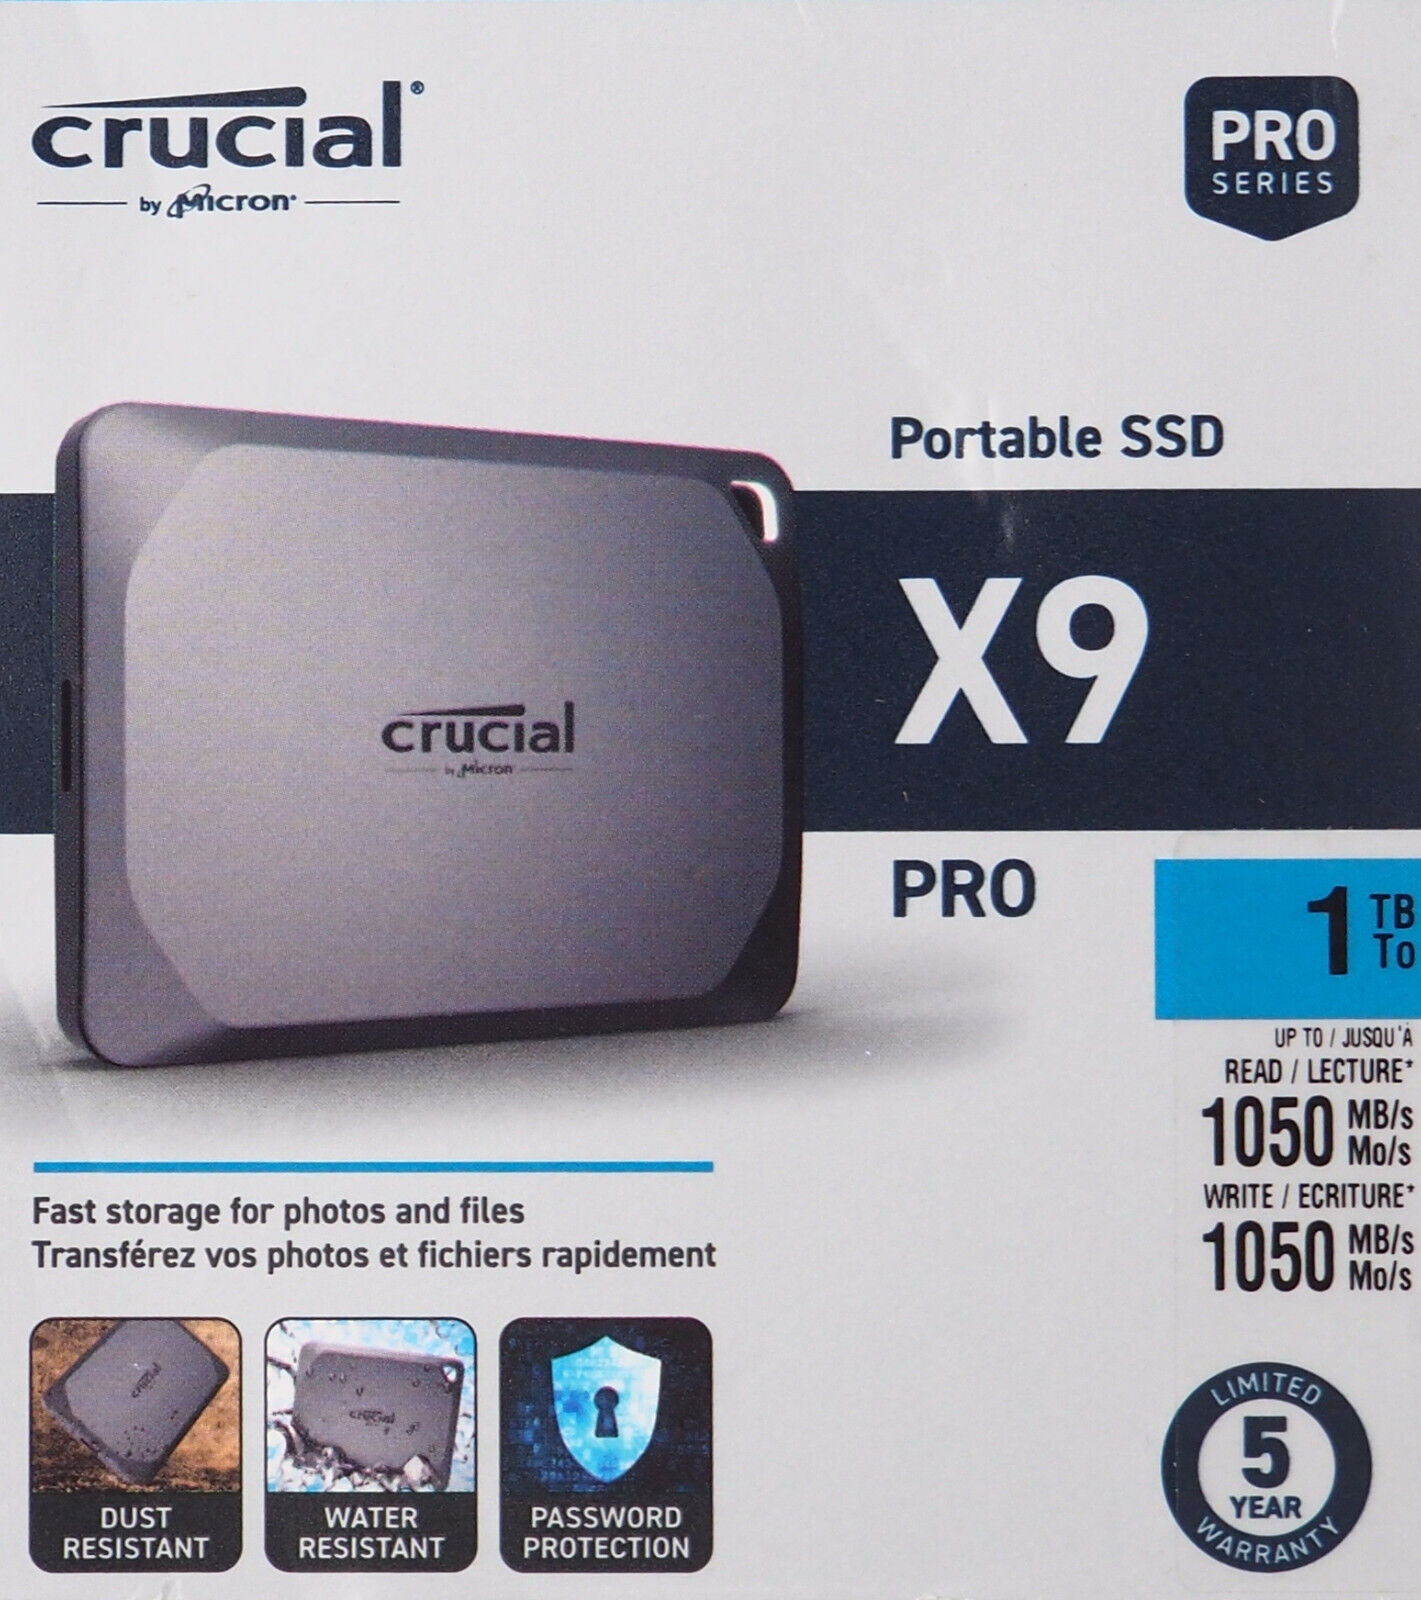 Crucial X9 Pro USB 3.2 Type-C Portable External SSD #CT1000X9PROSSD9 NEW SEALED